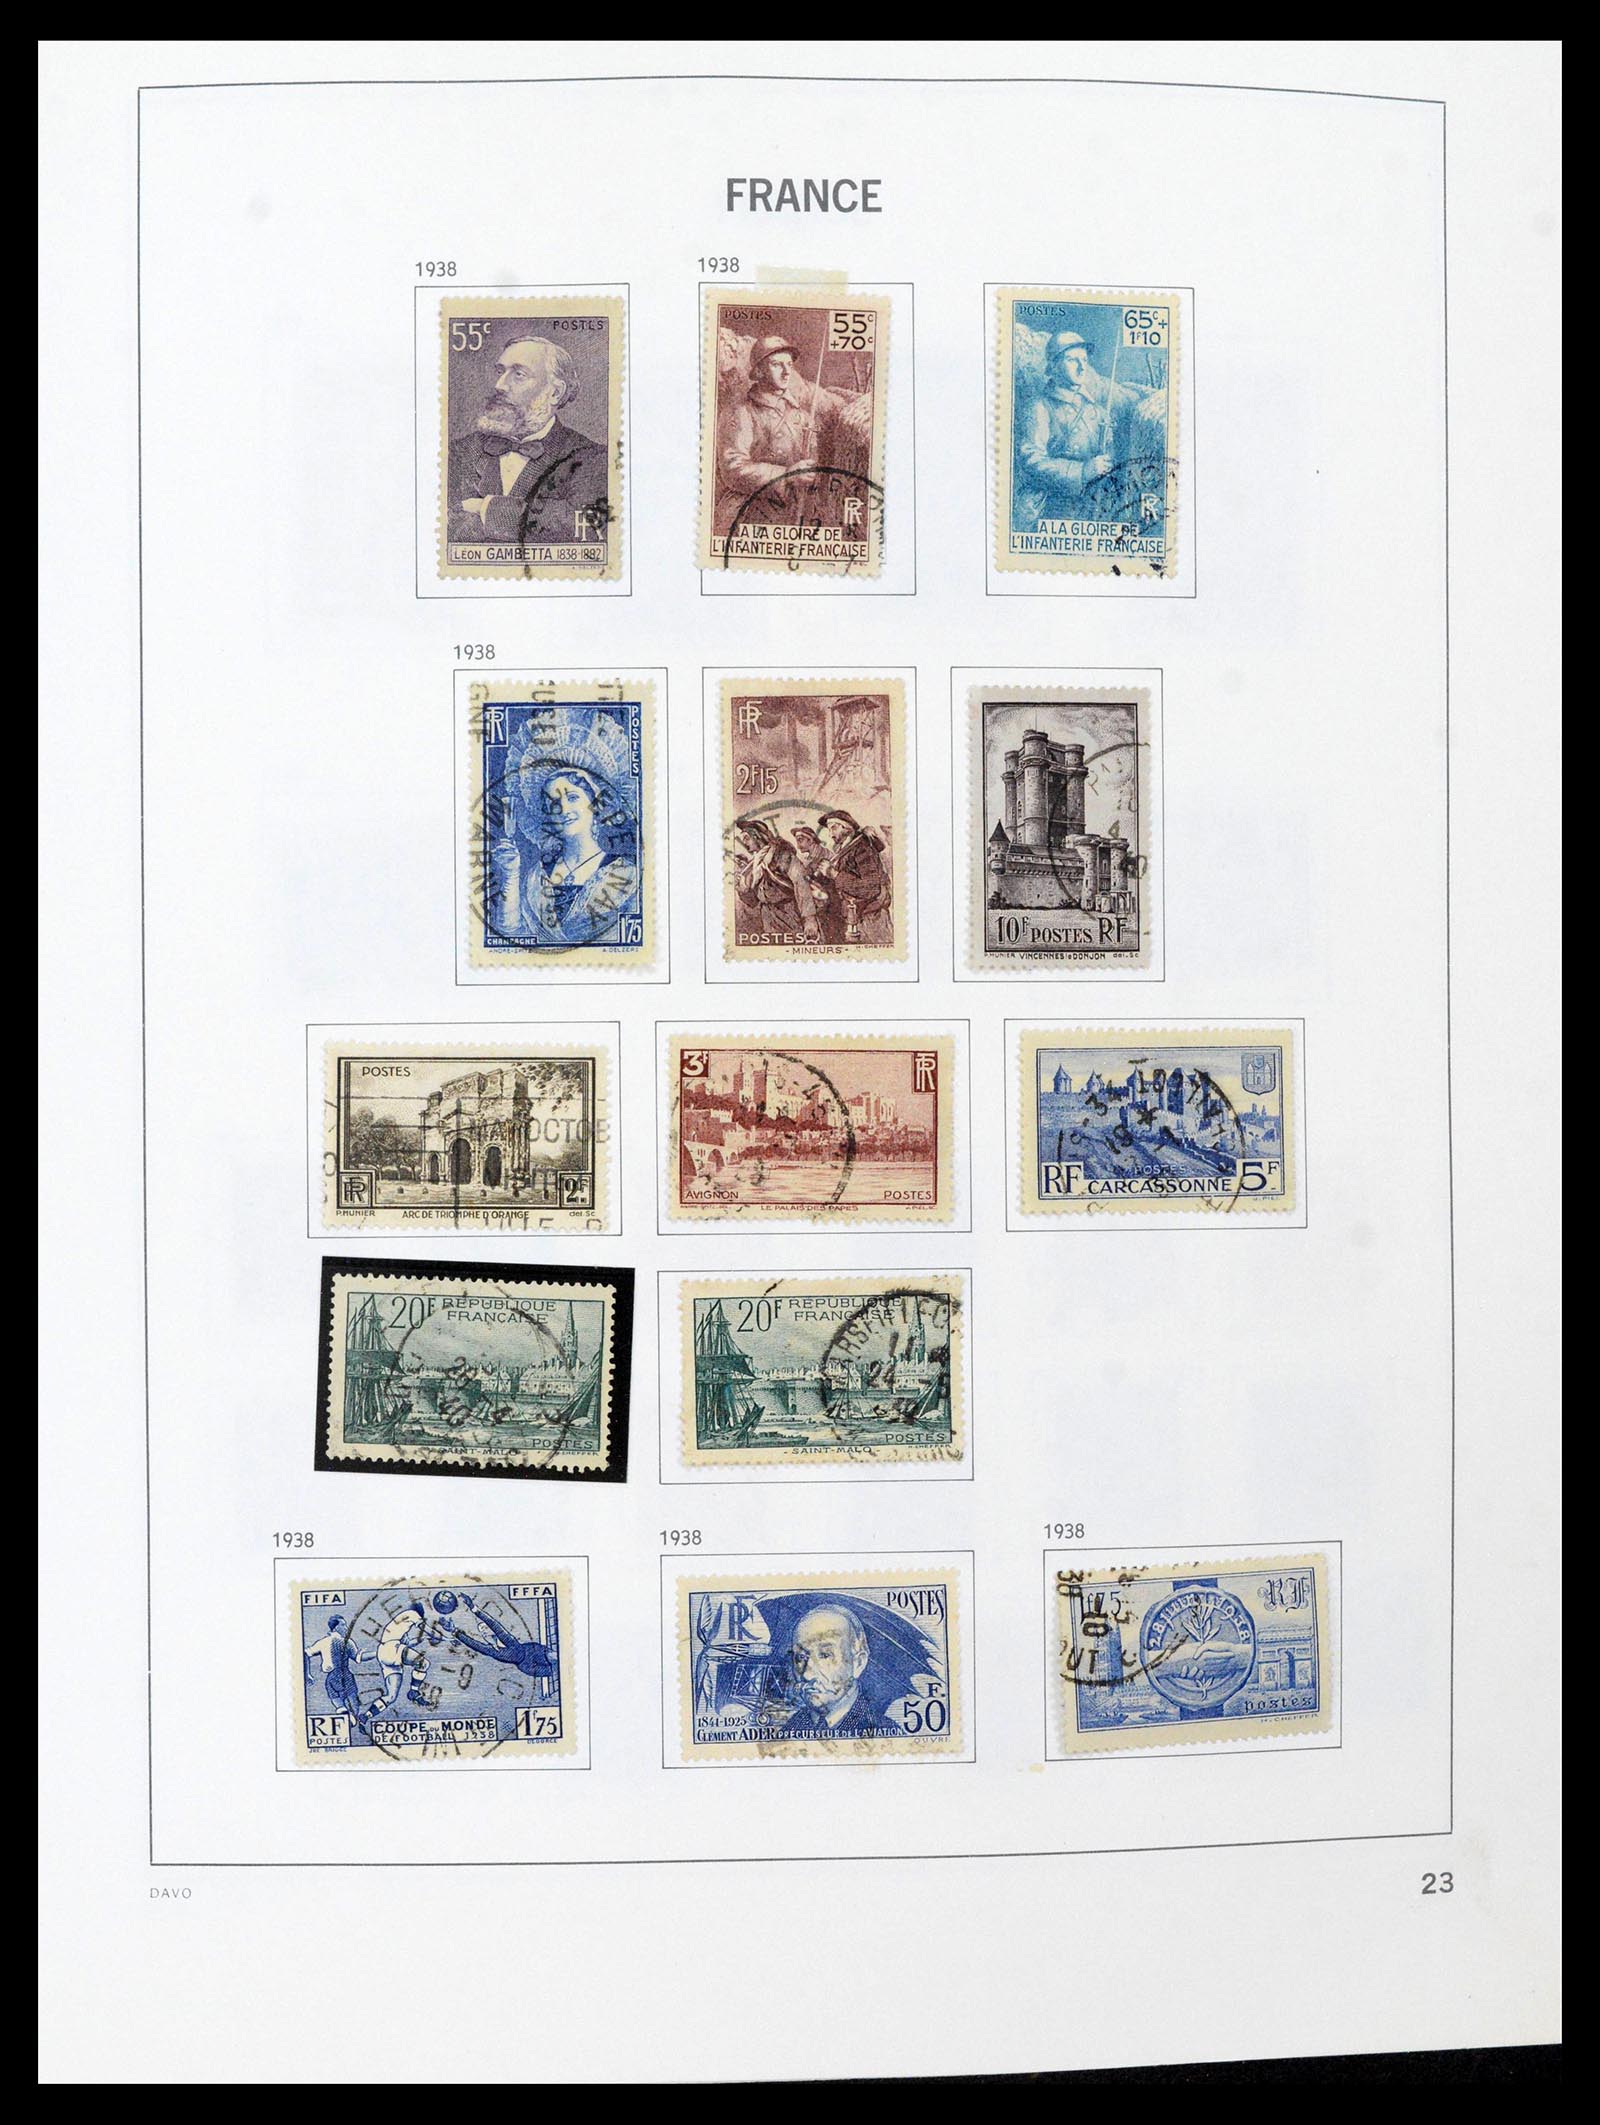 39164 0023 - Stamp collection 39164 France 1849-1981.